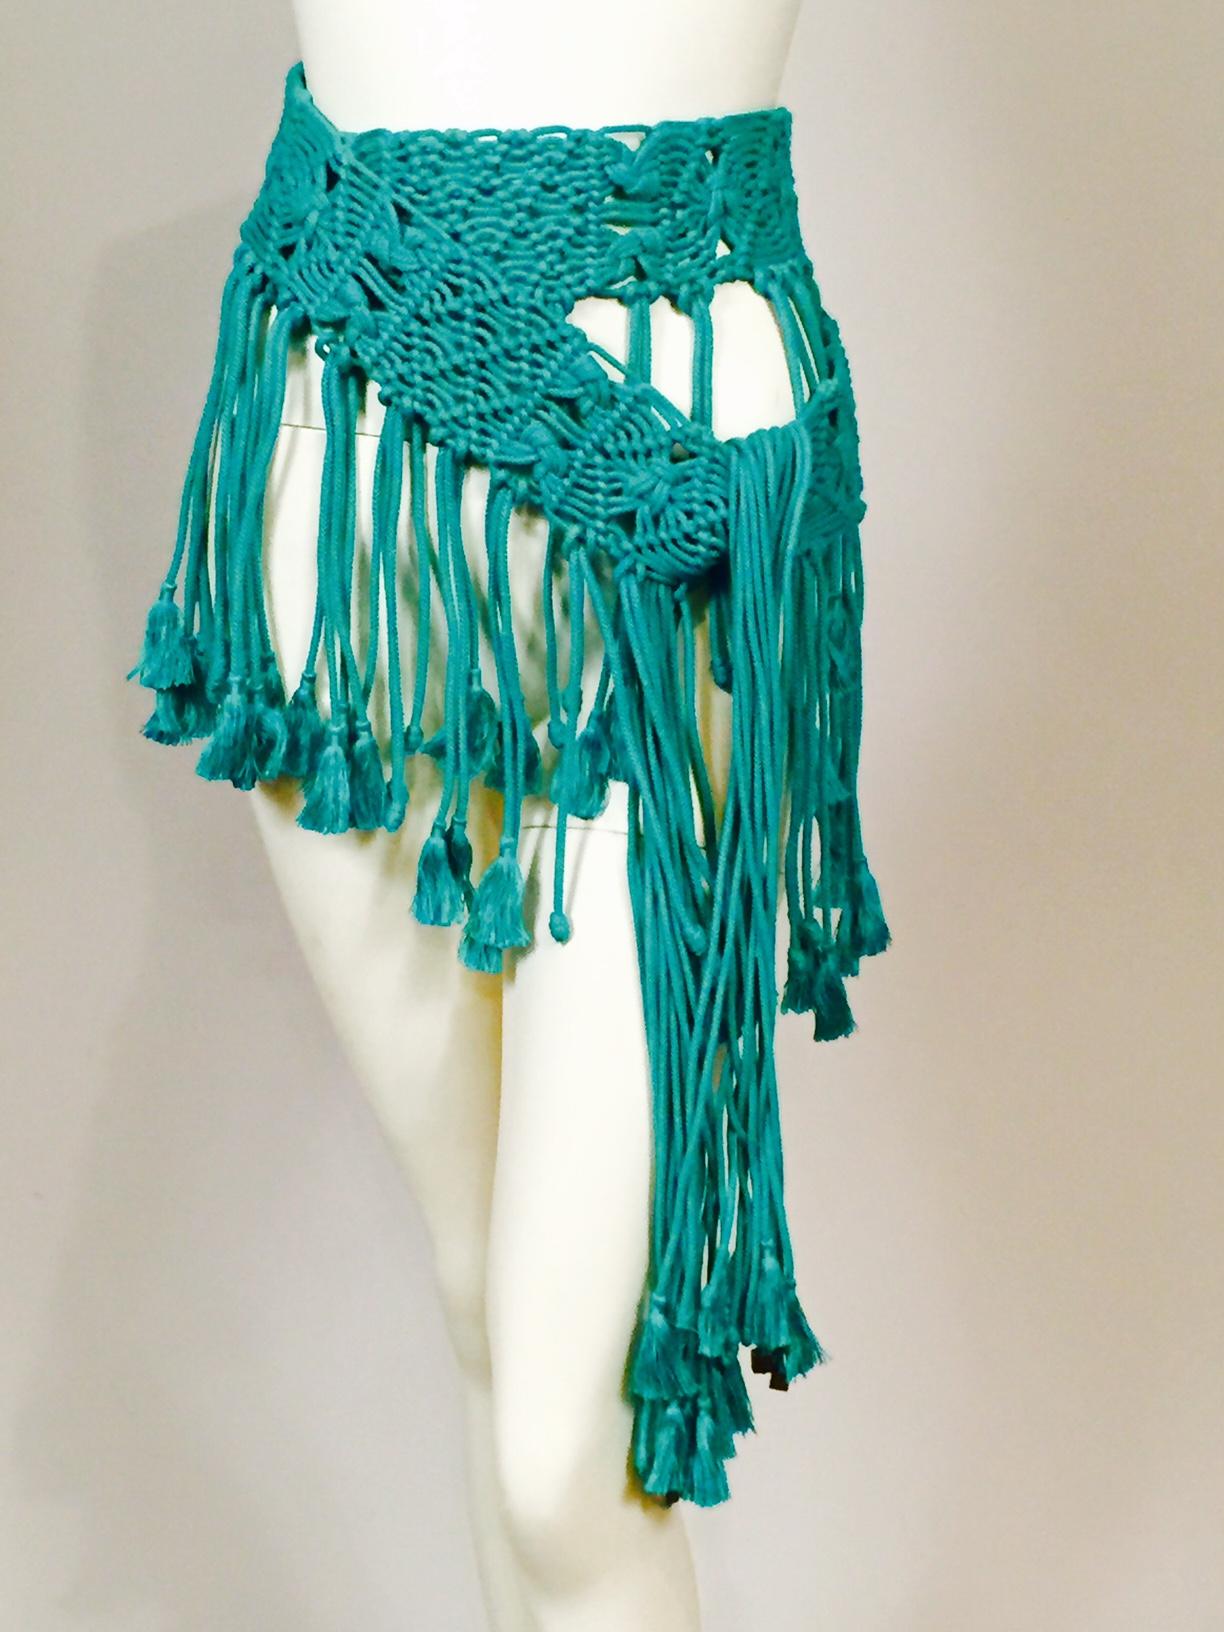 This amazing belt will transform any outfit, the color, design and movement are just fabulous. A wide band of  macrame is finished with a long fringe consisting of pairs of cord with either tassels or knots at the ends. Both ends of the belt are